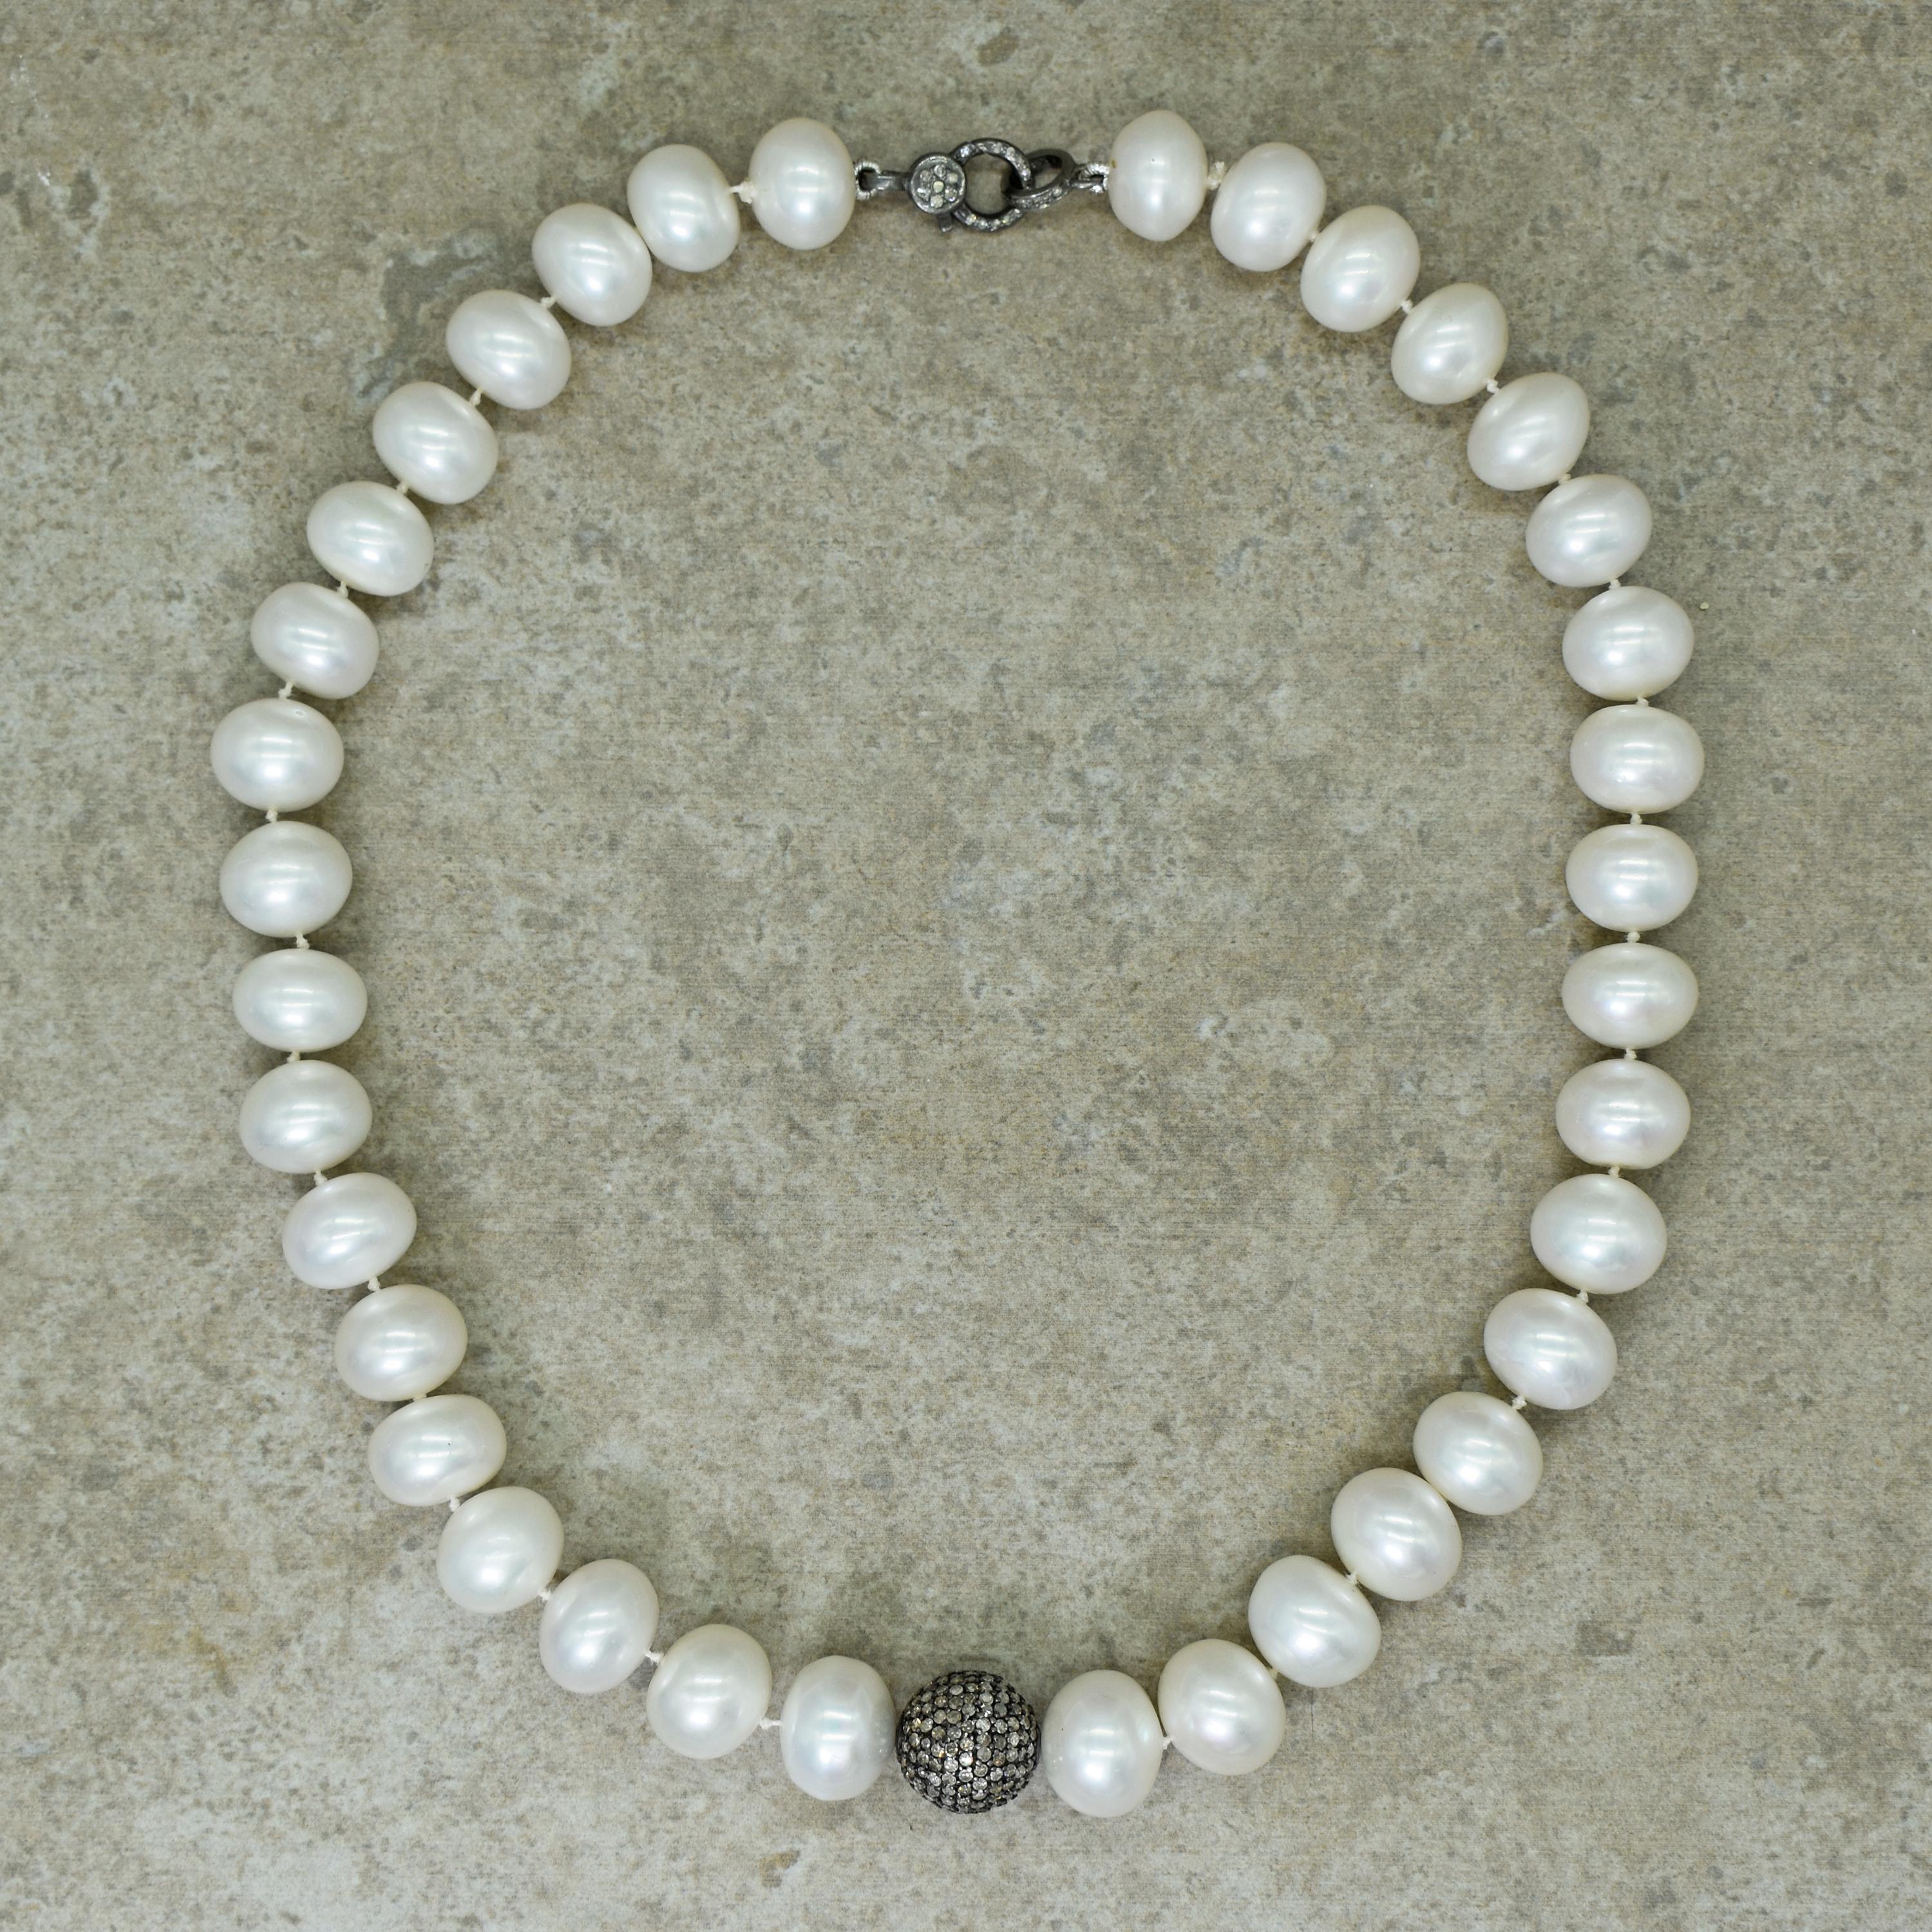 Button or roundel shaped Freshwater Pearl knotted strand with oxidized sterling silver pavé Diamonds center bead and clasp. Necklace is 18 inches in length and Pearl beads are approximately 13-14mm wide. Timeless yet contemporary Pearl strand.